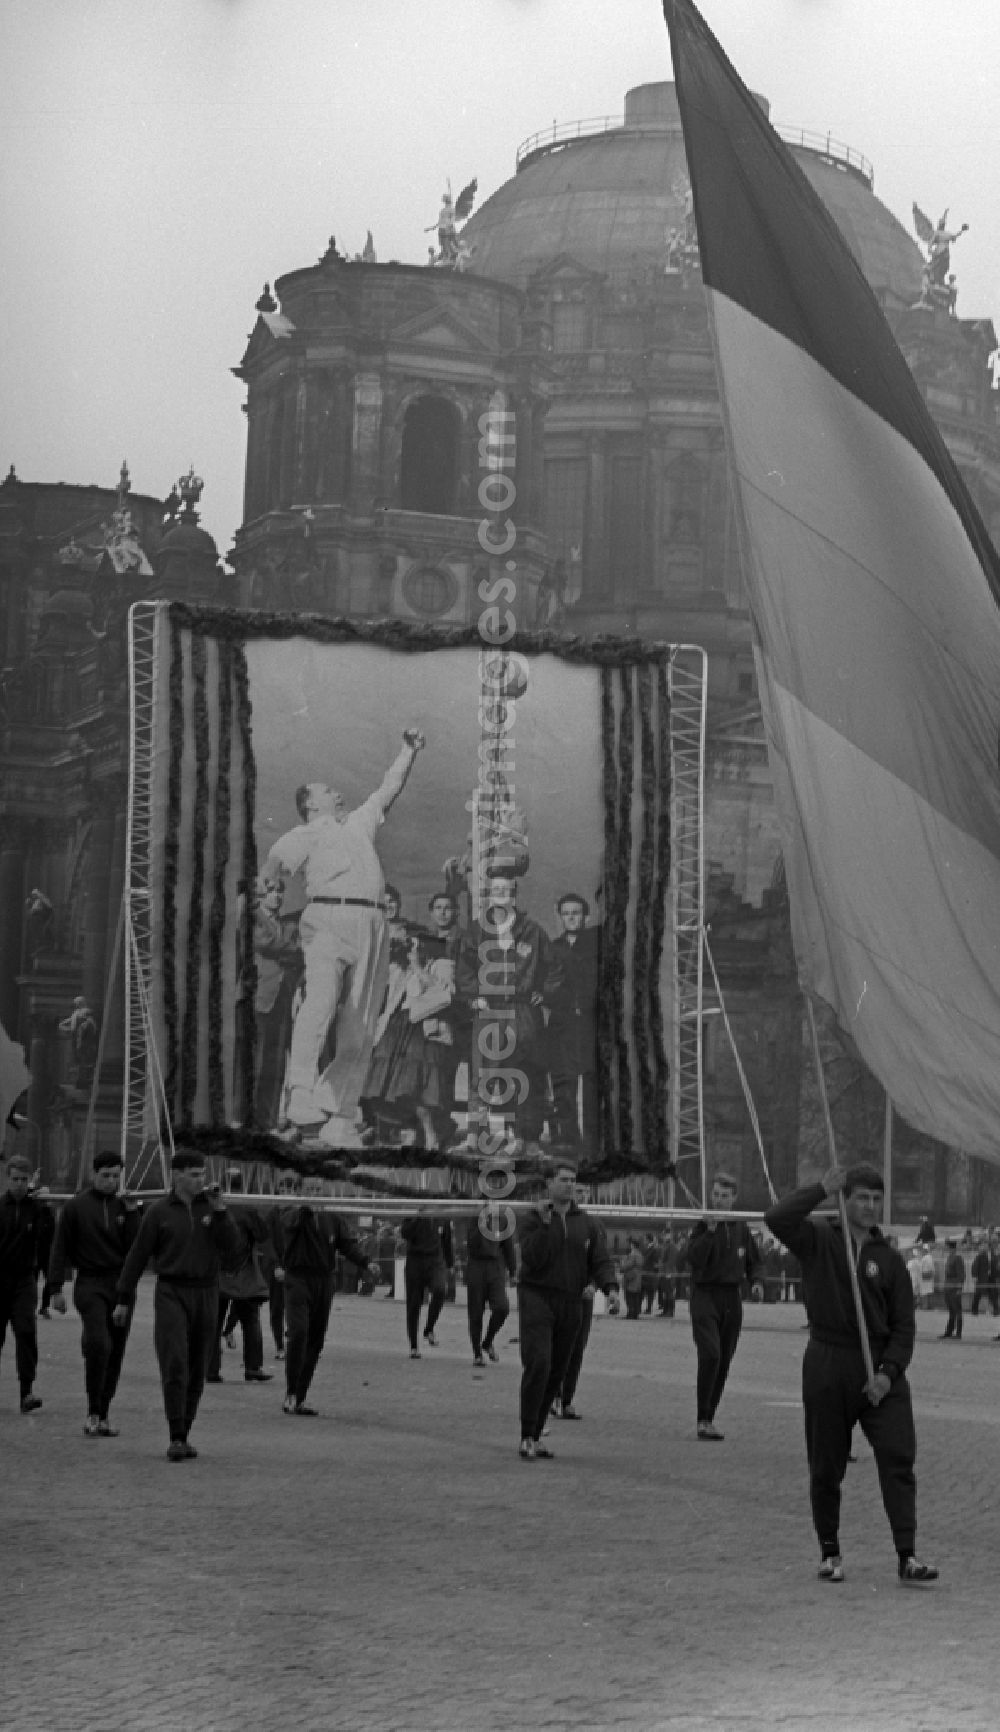 GDR photo archive: Berlin Mitte - Enthusiastic members of the SC Dynamo Berlin with flags, banners and slogans while parading at the VIP stand to fight and holiday of the 1st On May Schlossplatz in Berlin - Mitte